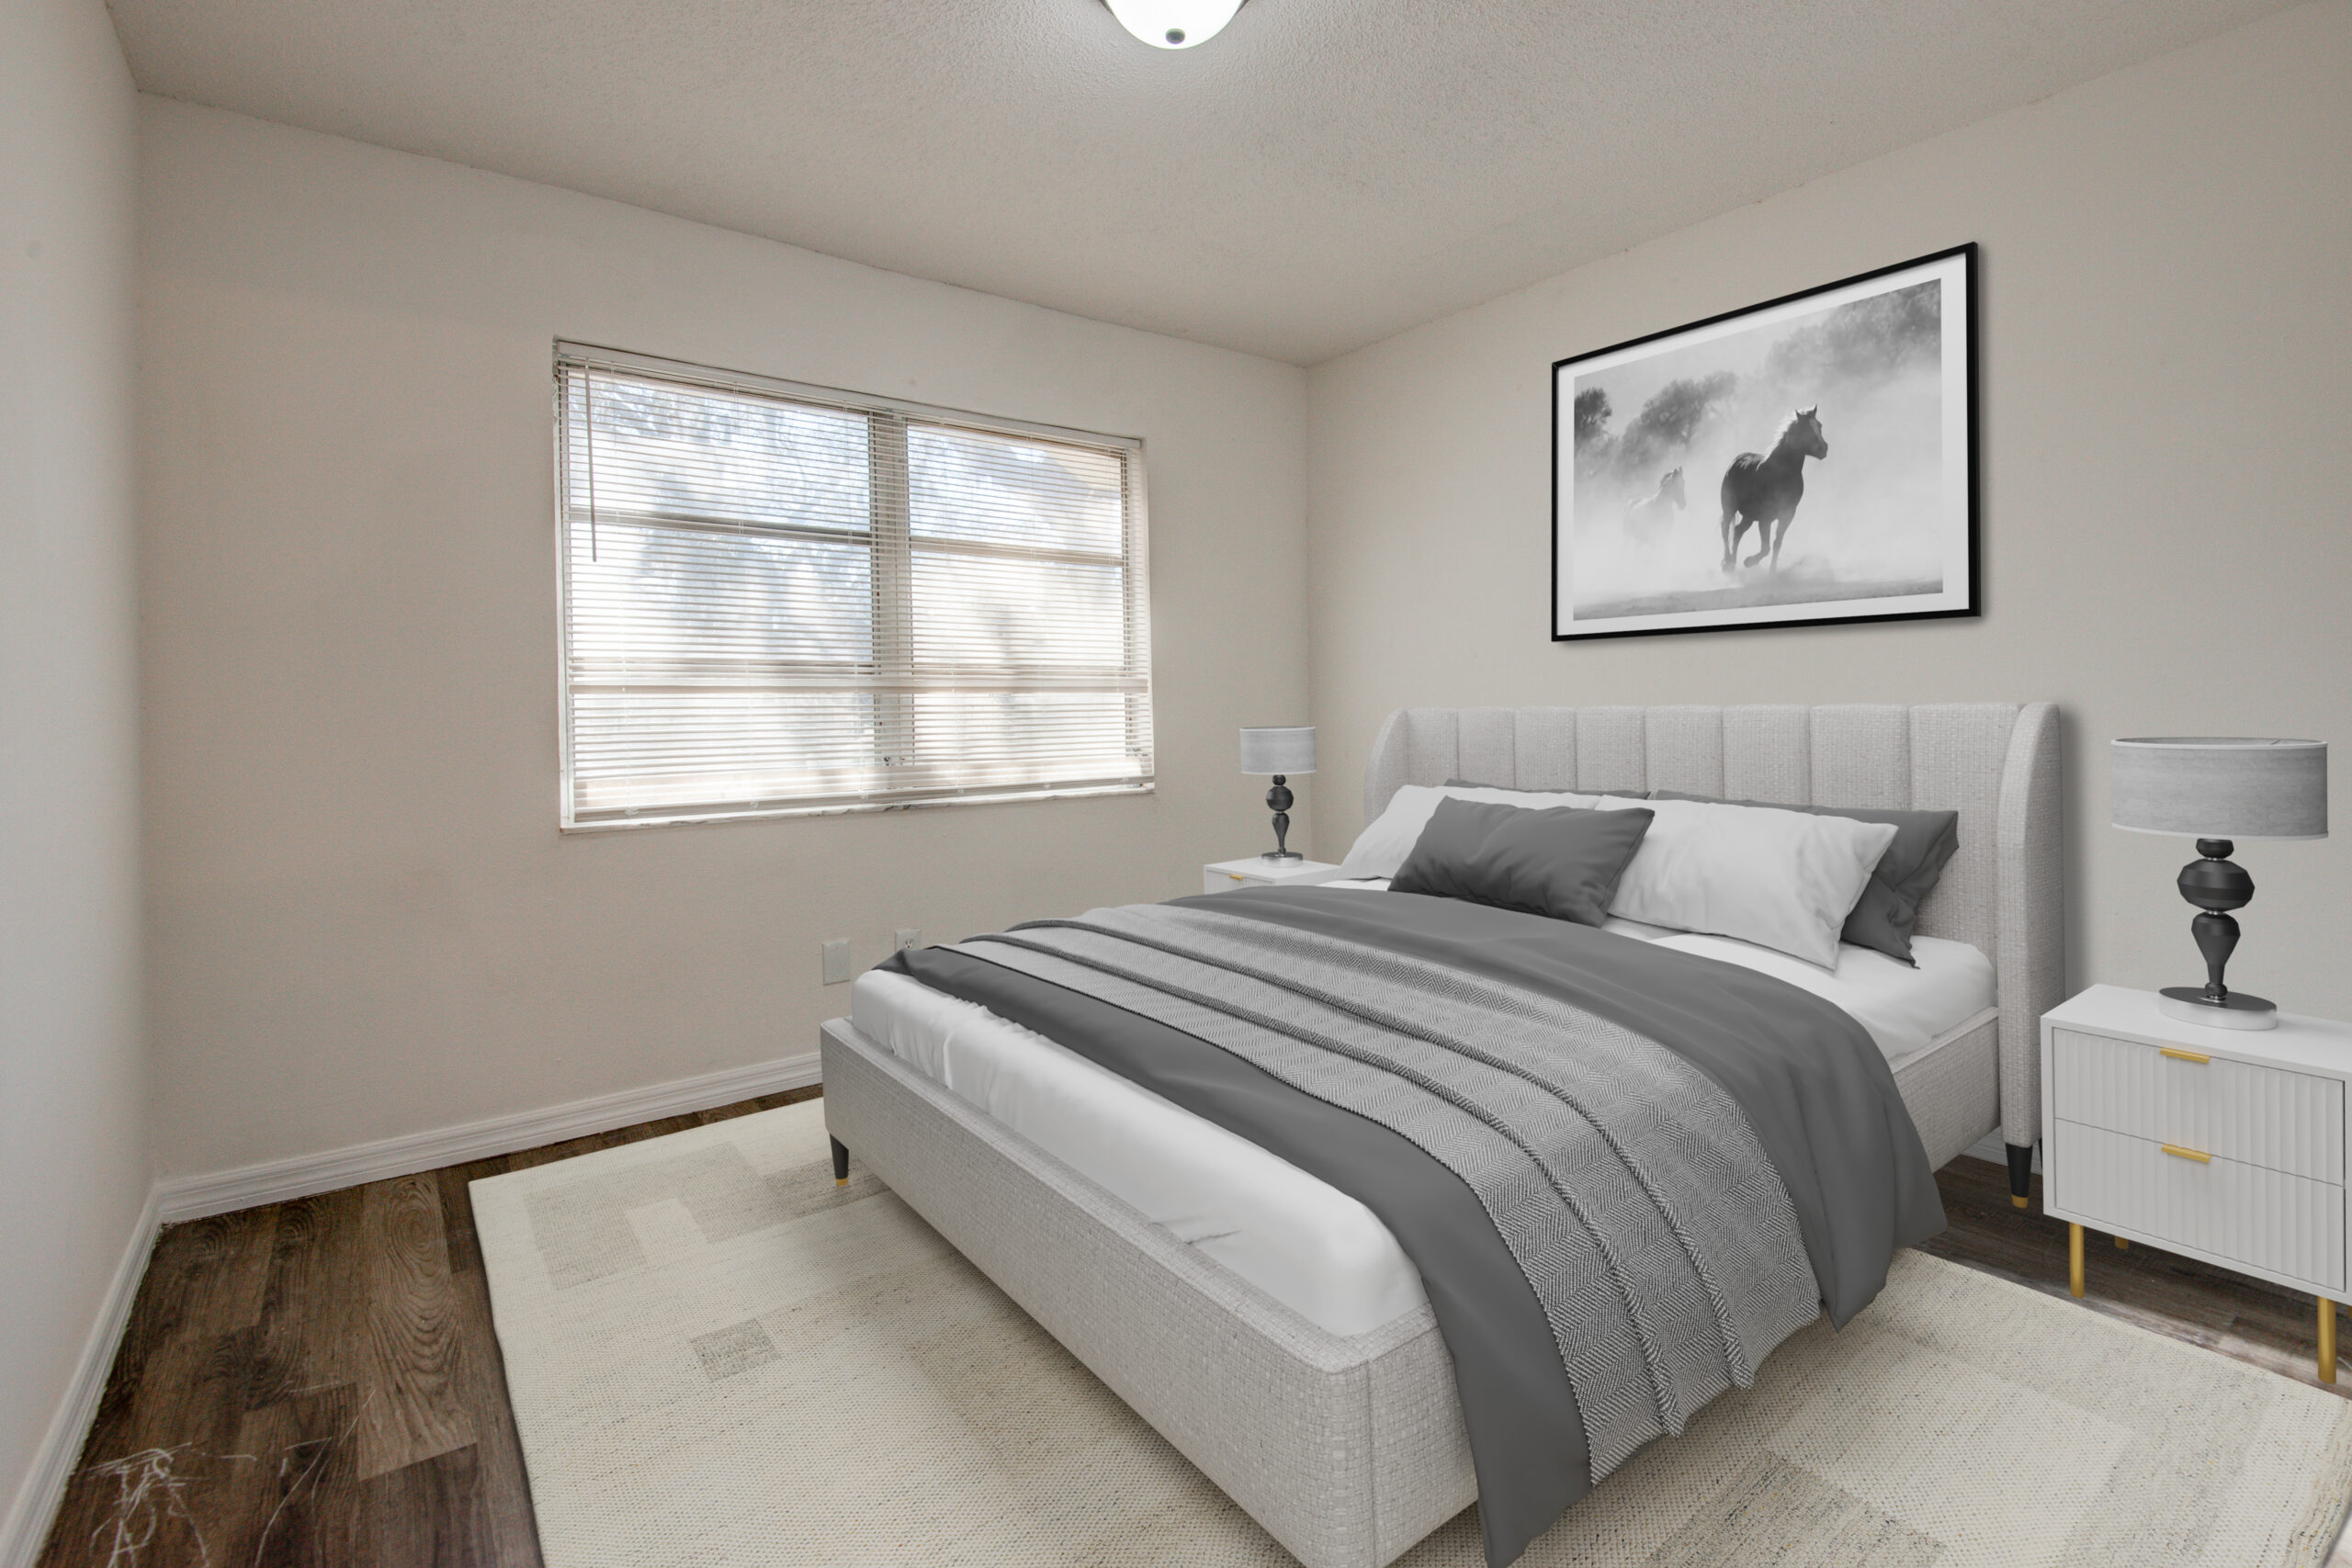 An empty bedroom has been virtually staged with a bed, rug, night stand, and large photo on the wall